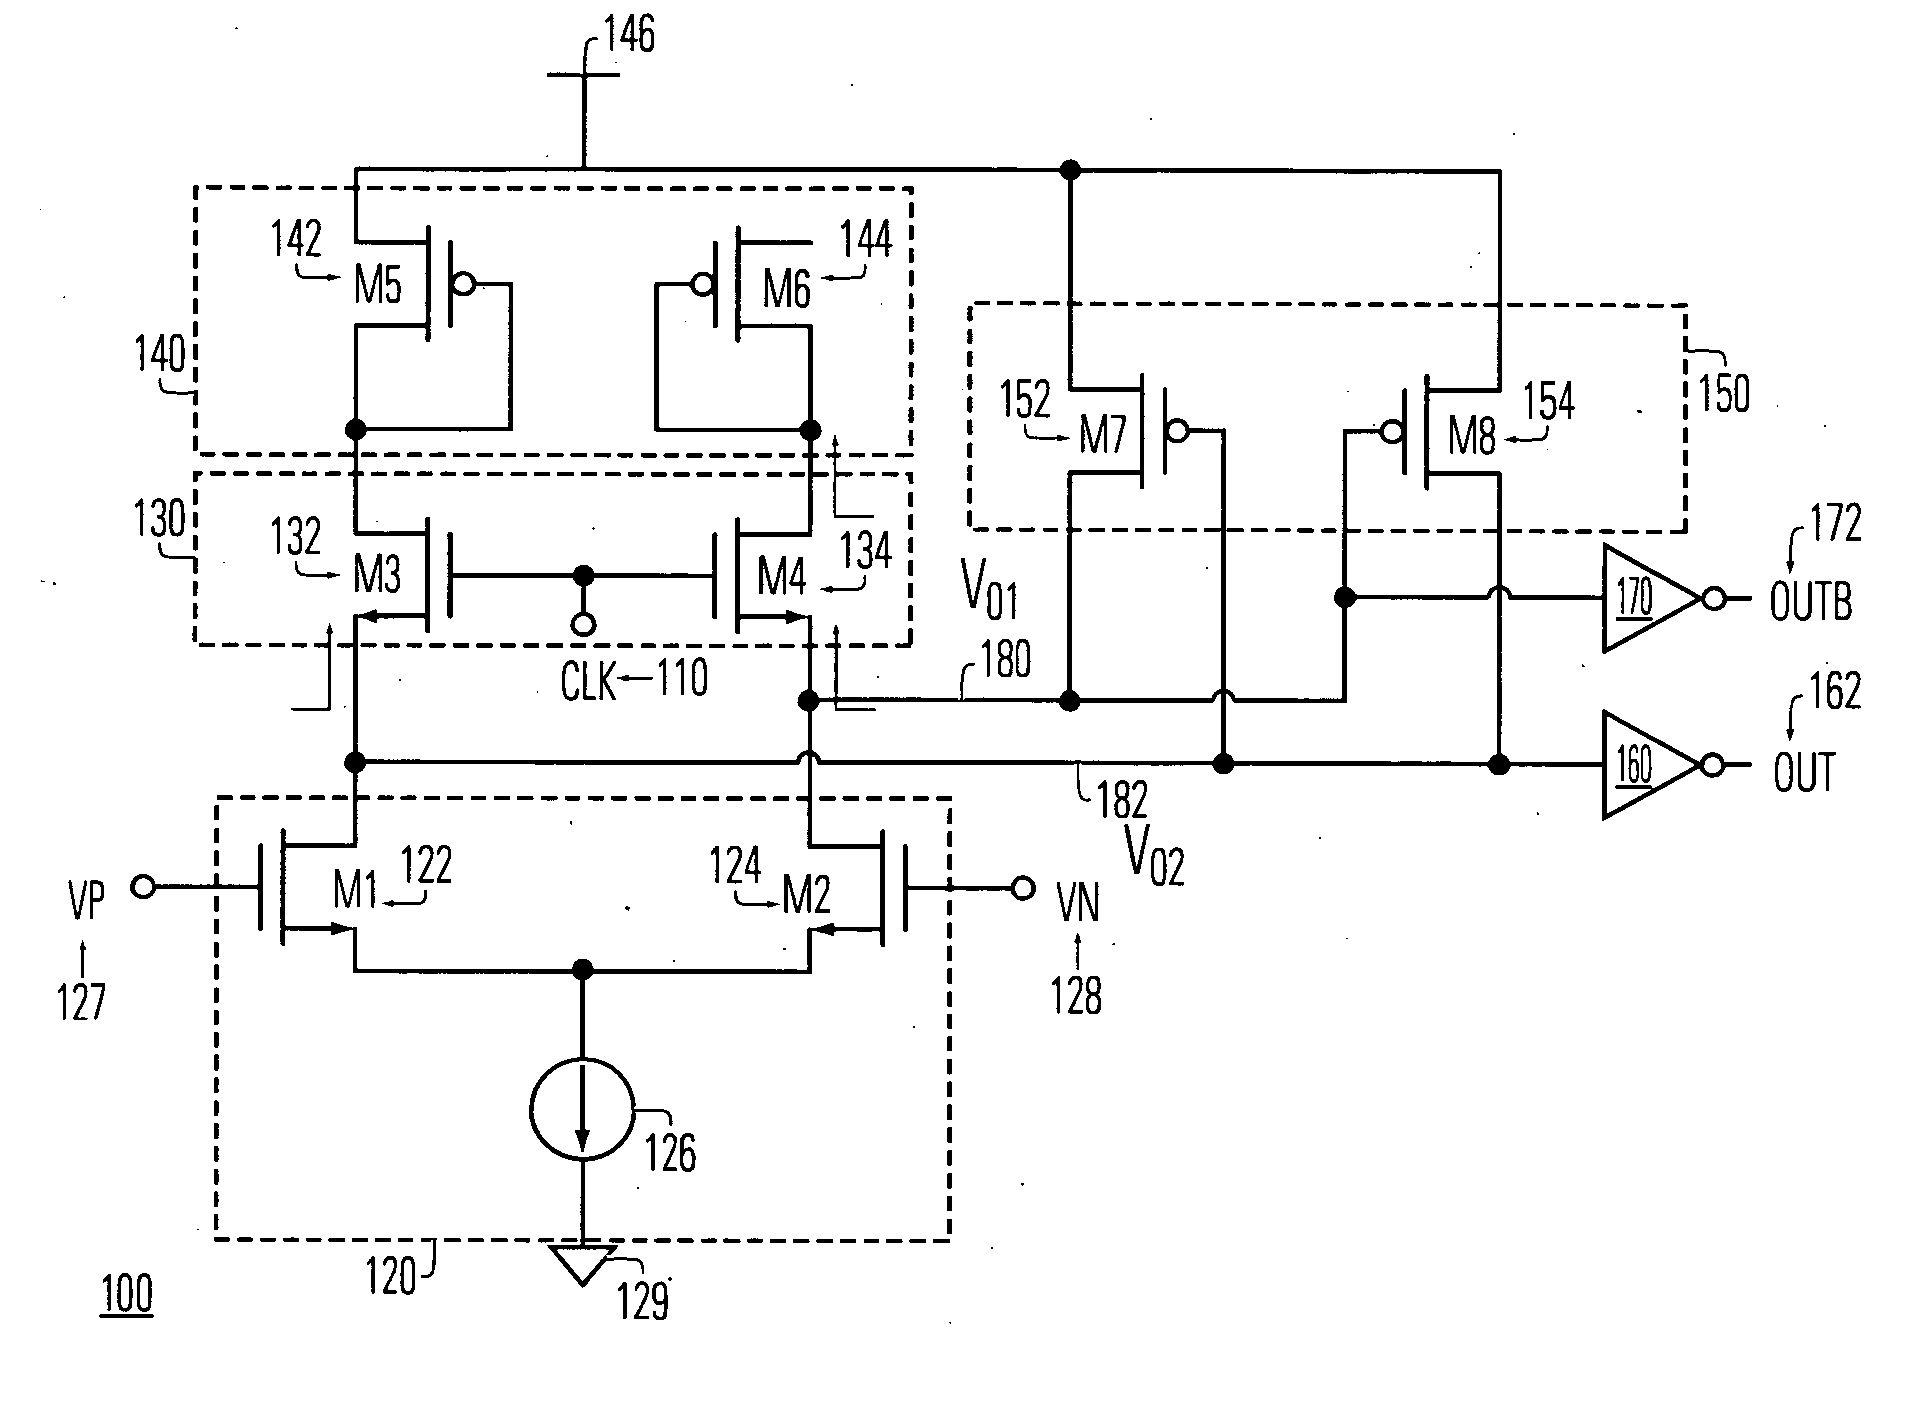 Differential sense amplifier circuit and method triggered by a clock signal through a switch circuit